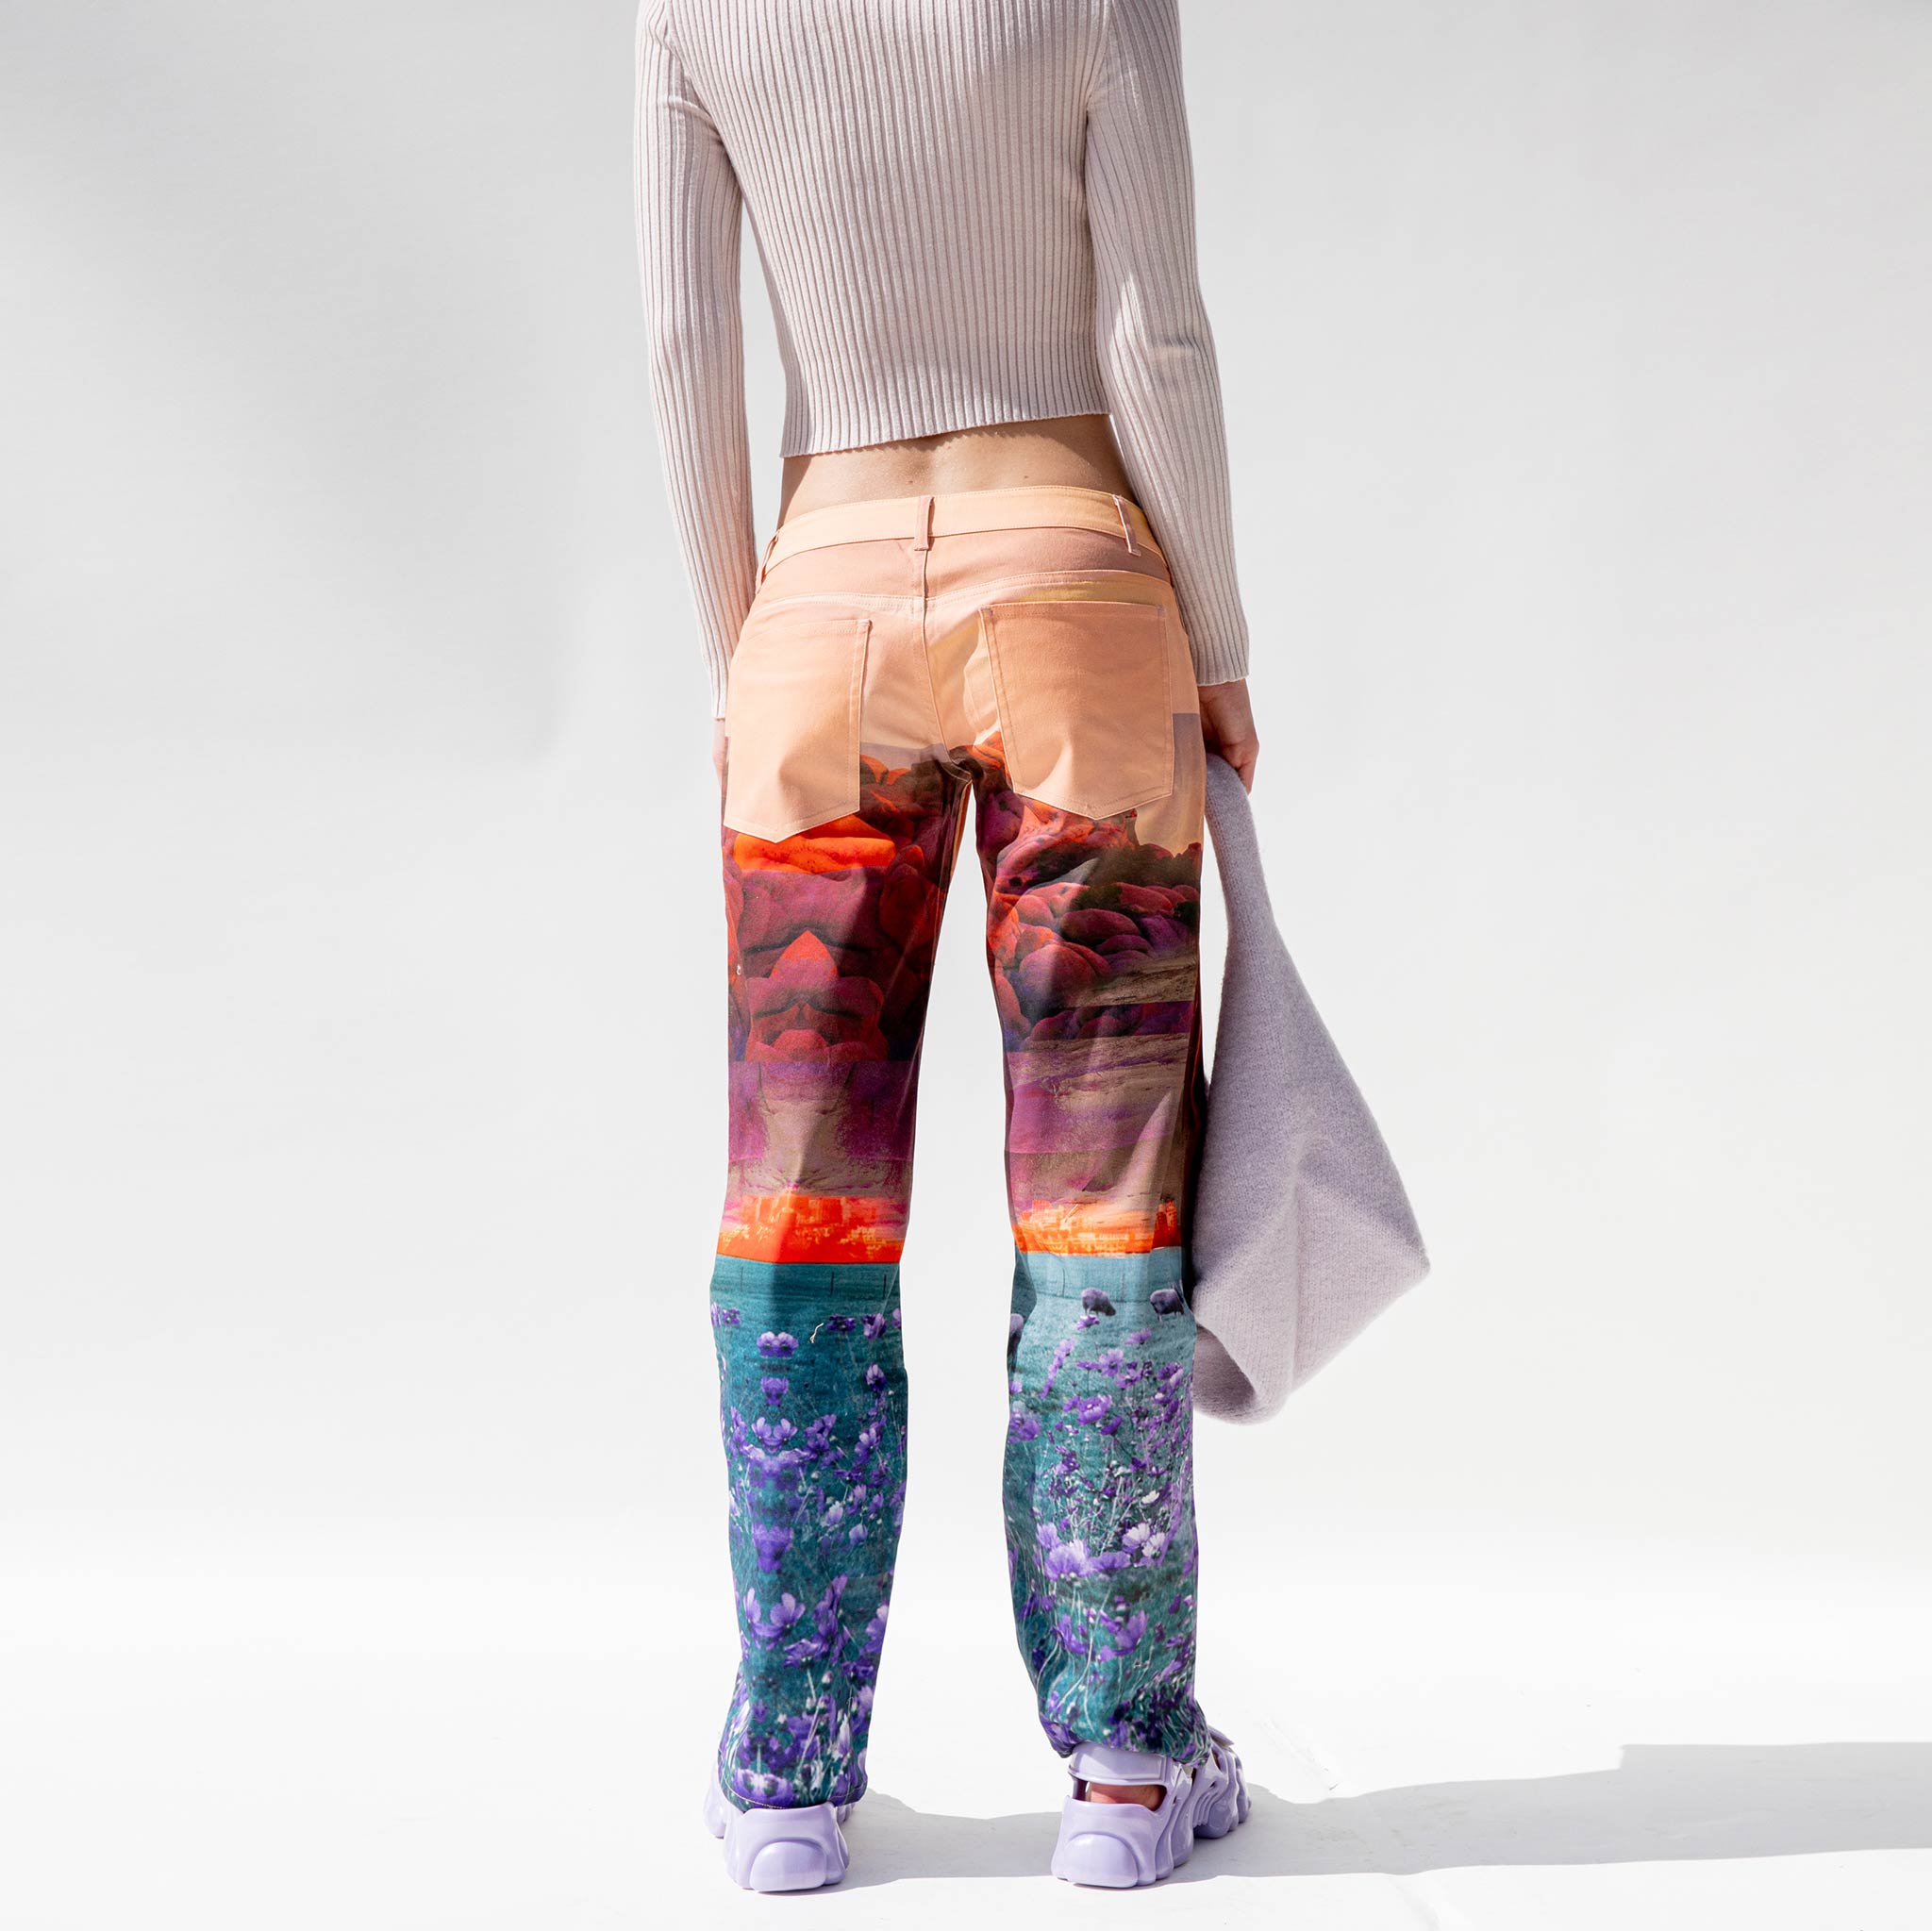 Miaou Atlas Pants featuring collaged landscape prints, back view as worn by a model.